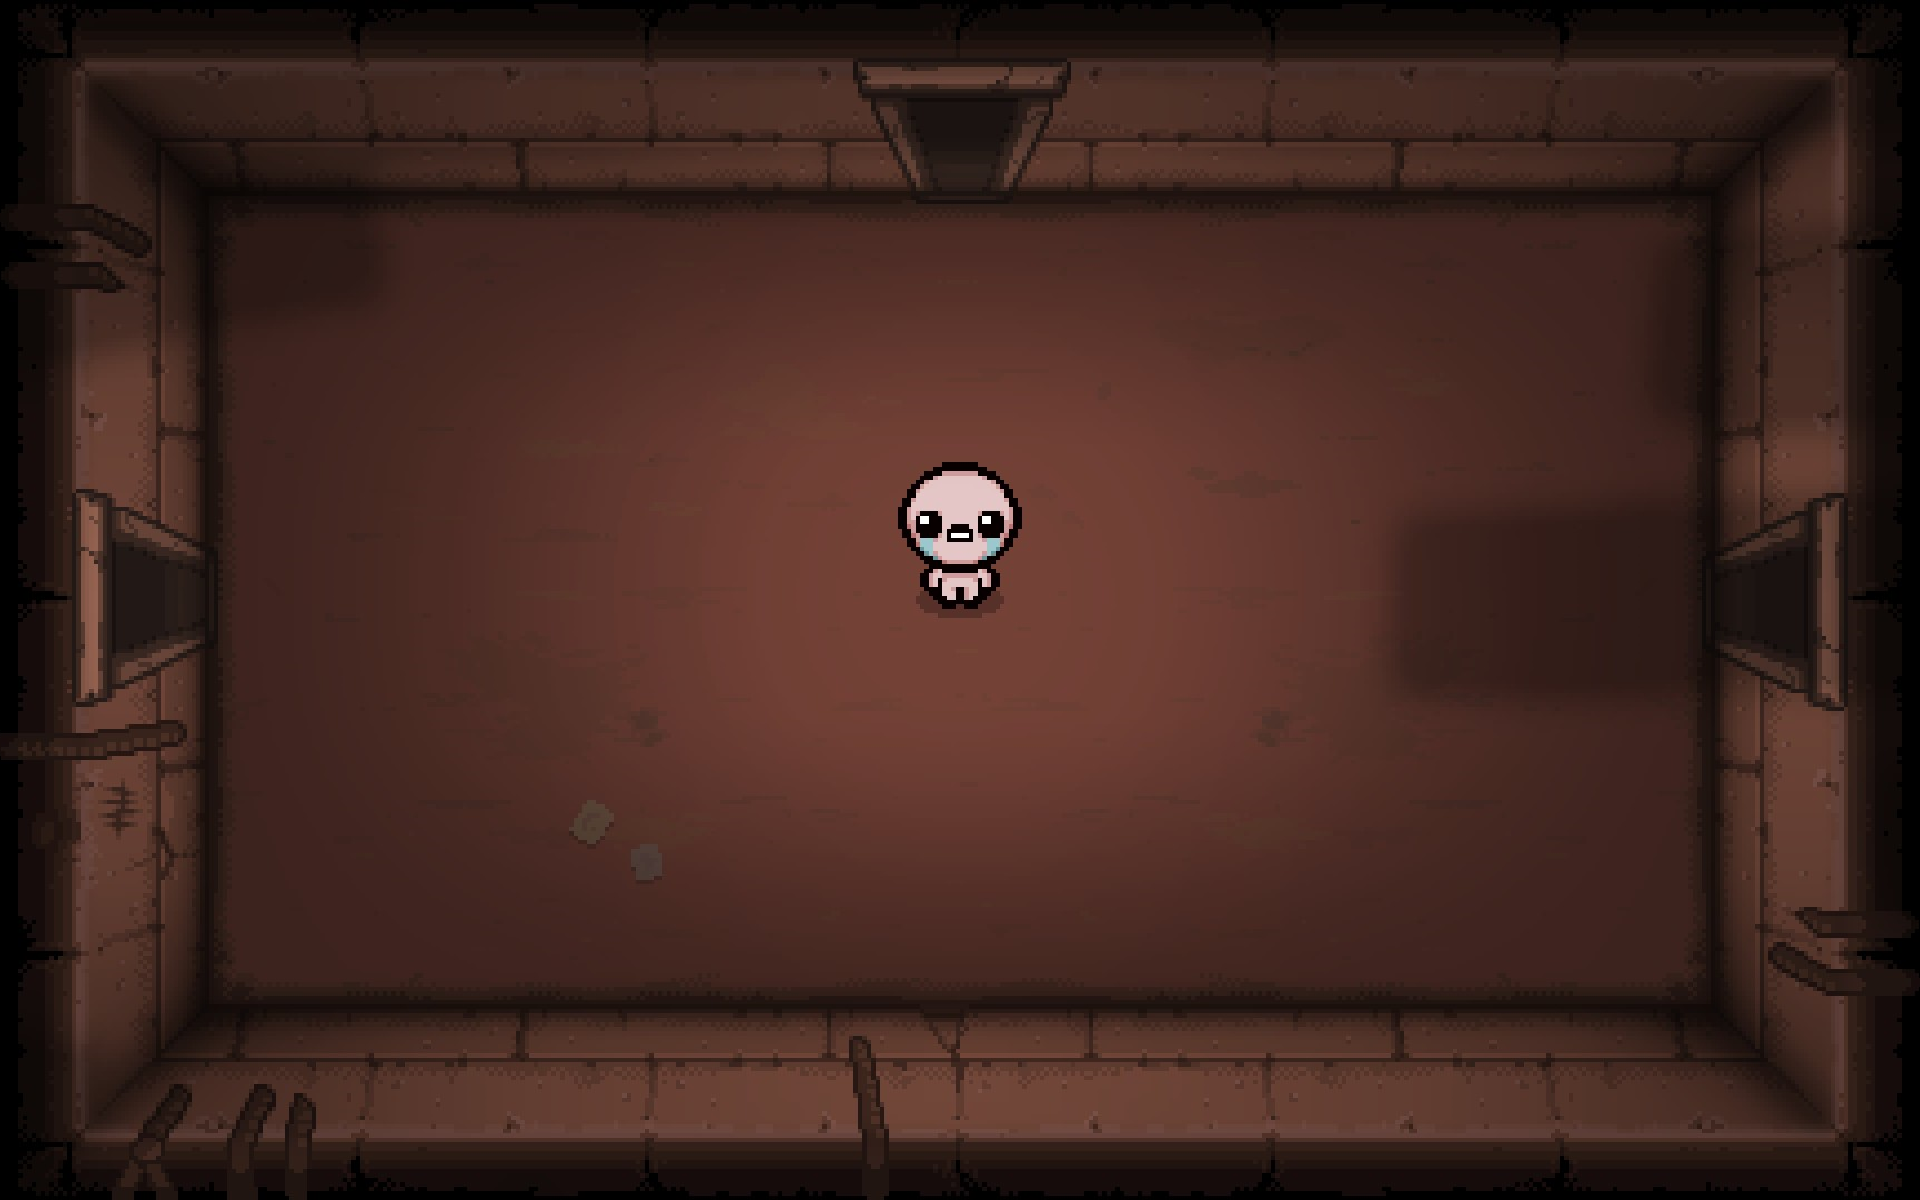 binding of isaac rebirth console commands